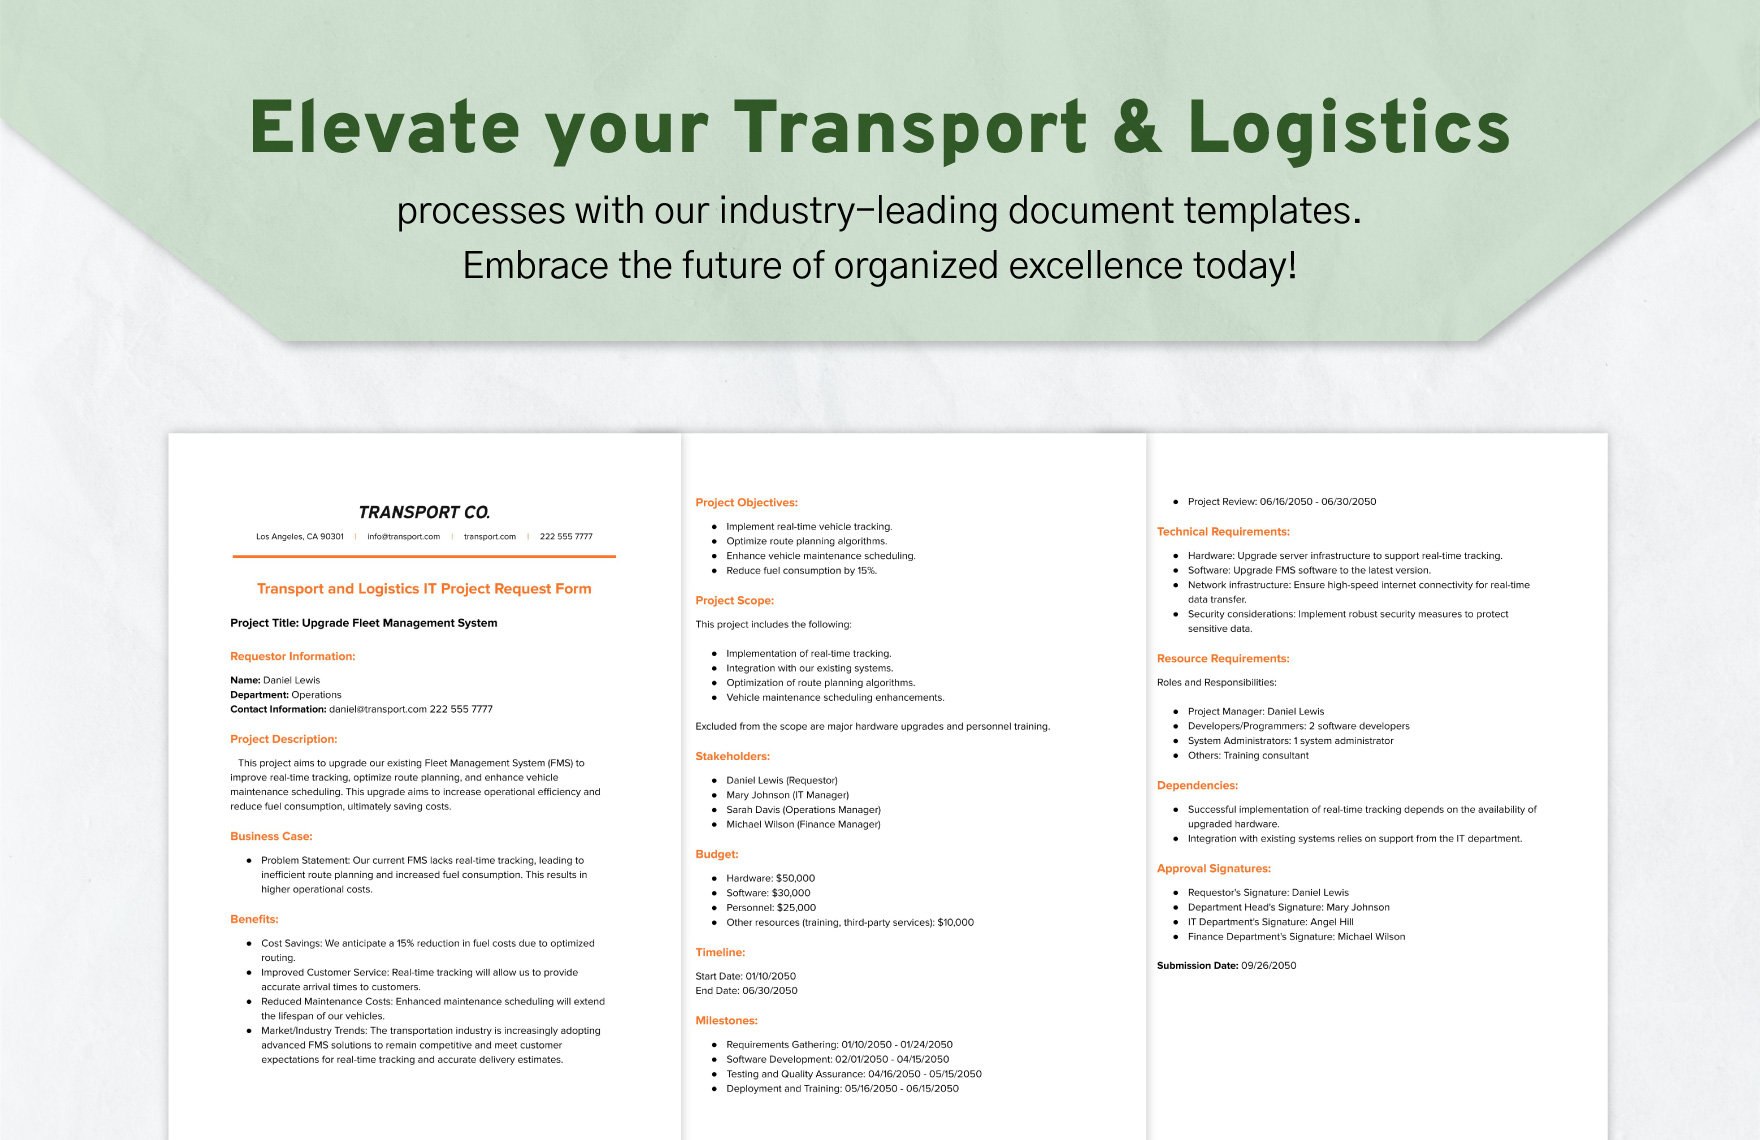 Transport and Logistics IT Project Request Form Template